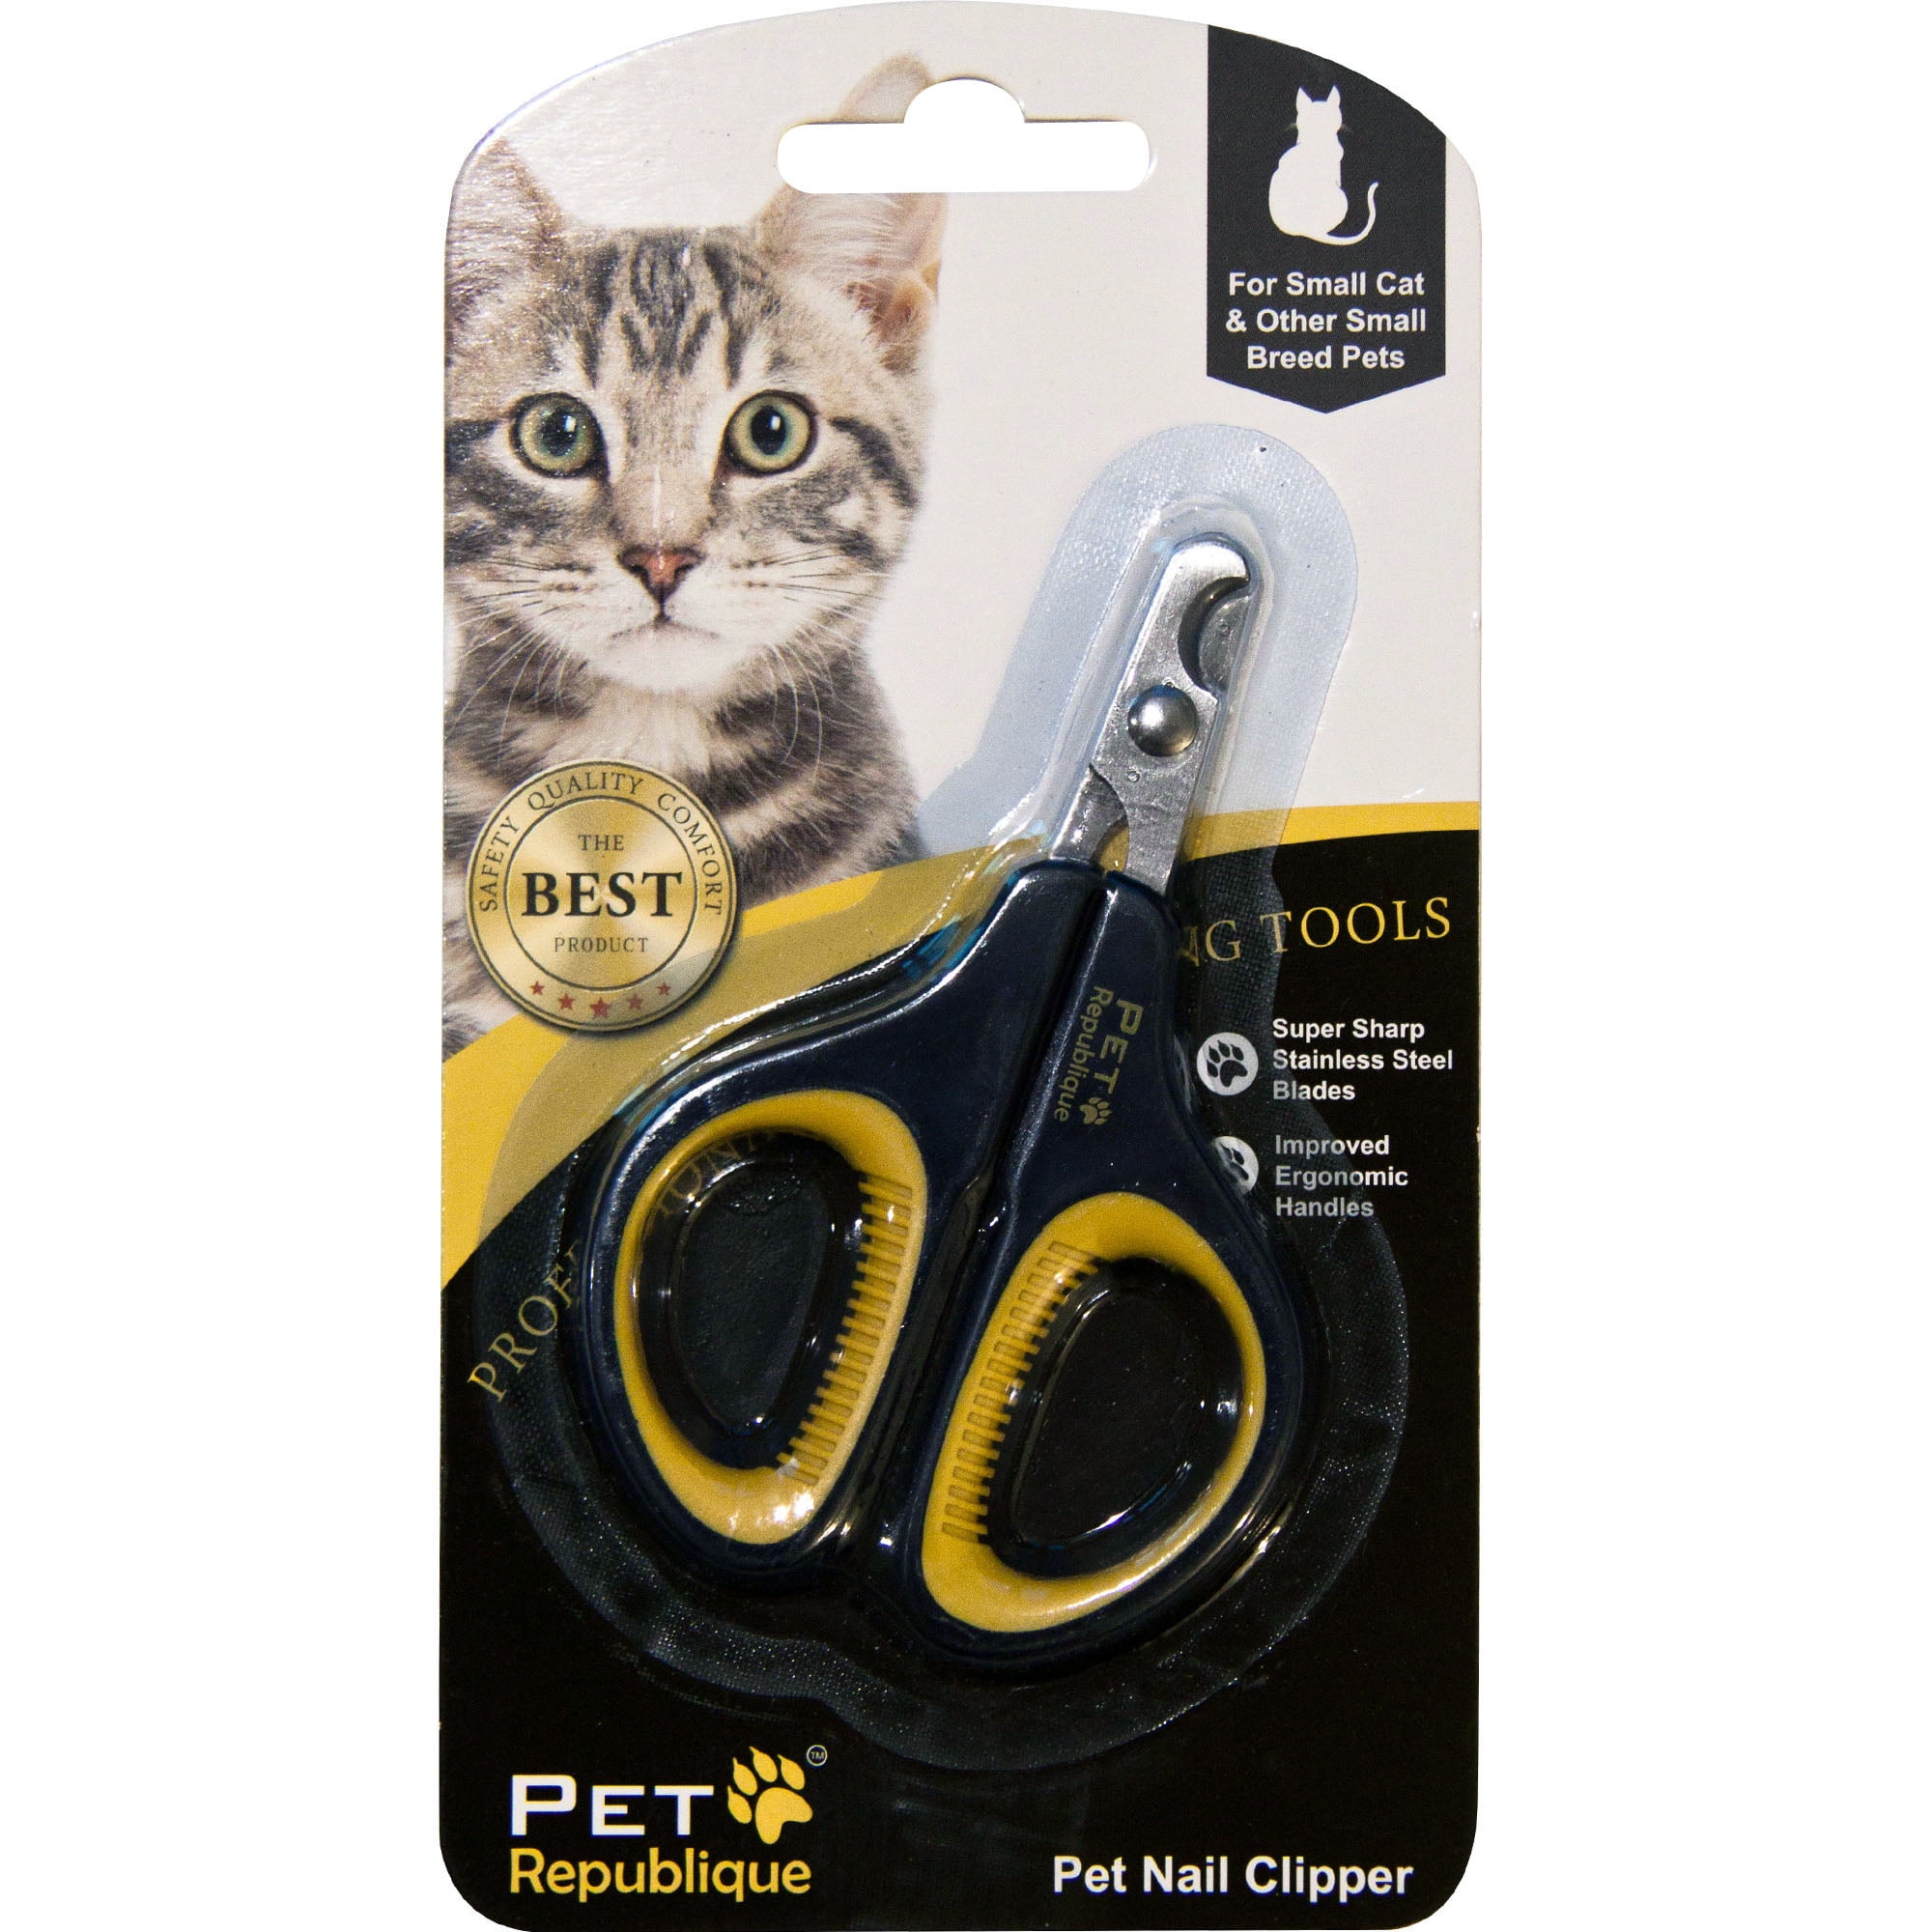 Cat Nail Clippers by Greenbrier Kennel Club ~ Pet Claw Care - Pink